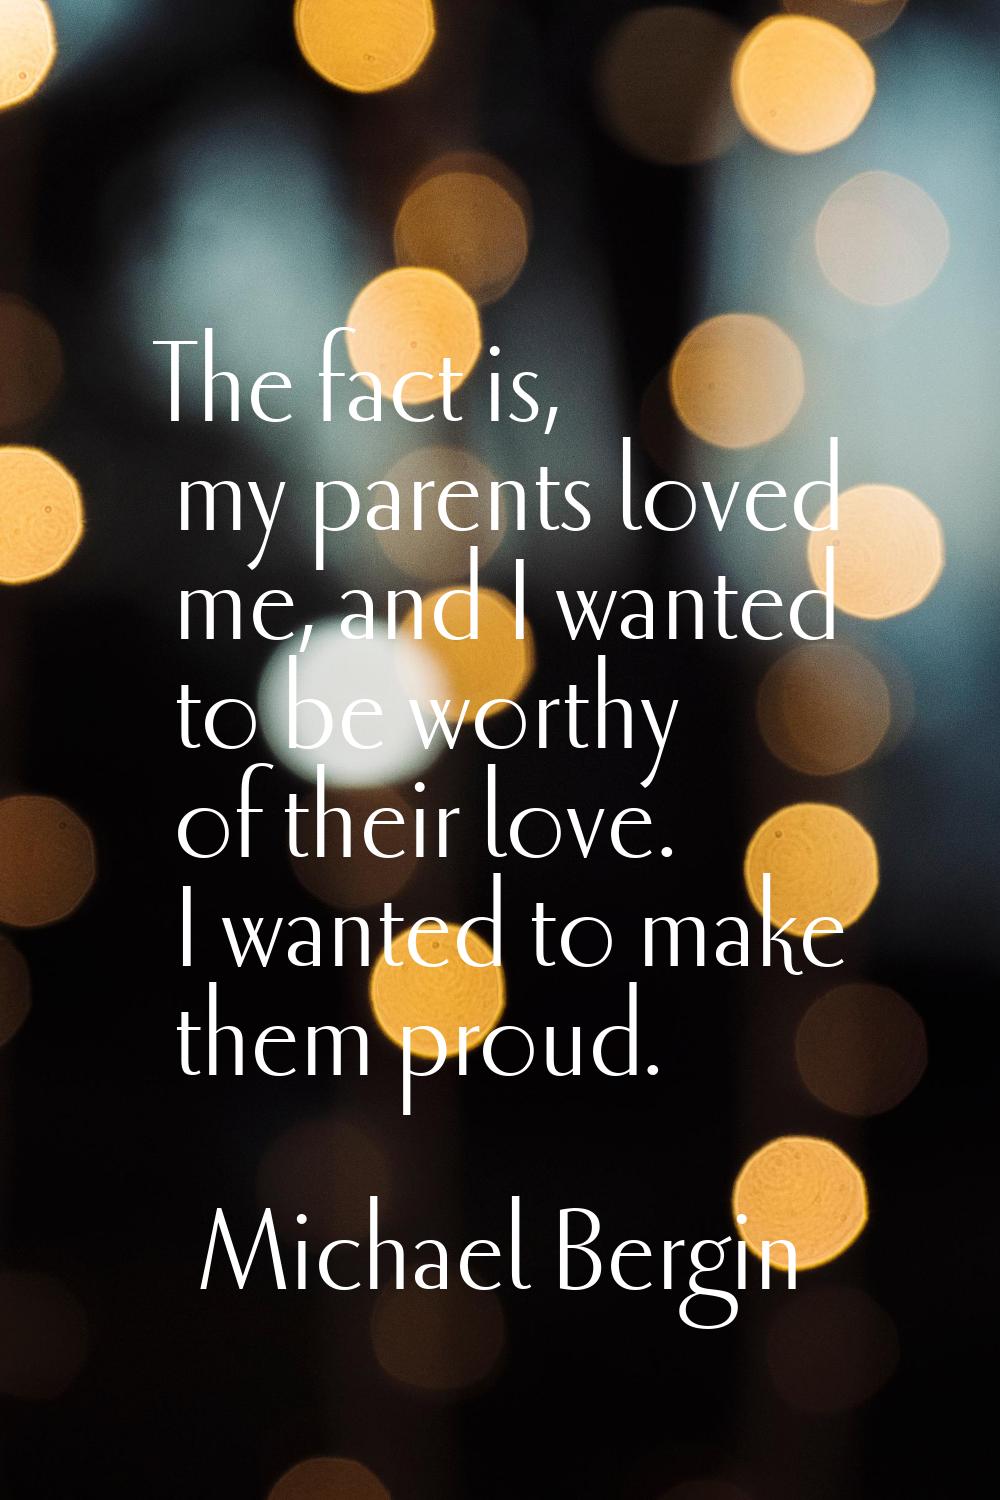 The fact is, my parents loved me, and I wanted to be worthy of their love. I wanted to make them pr